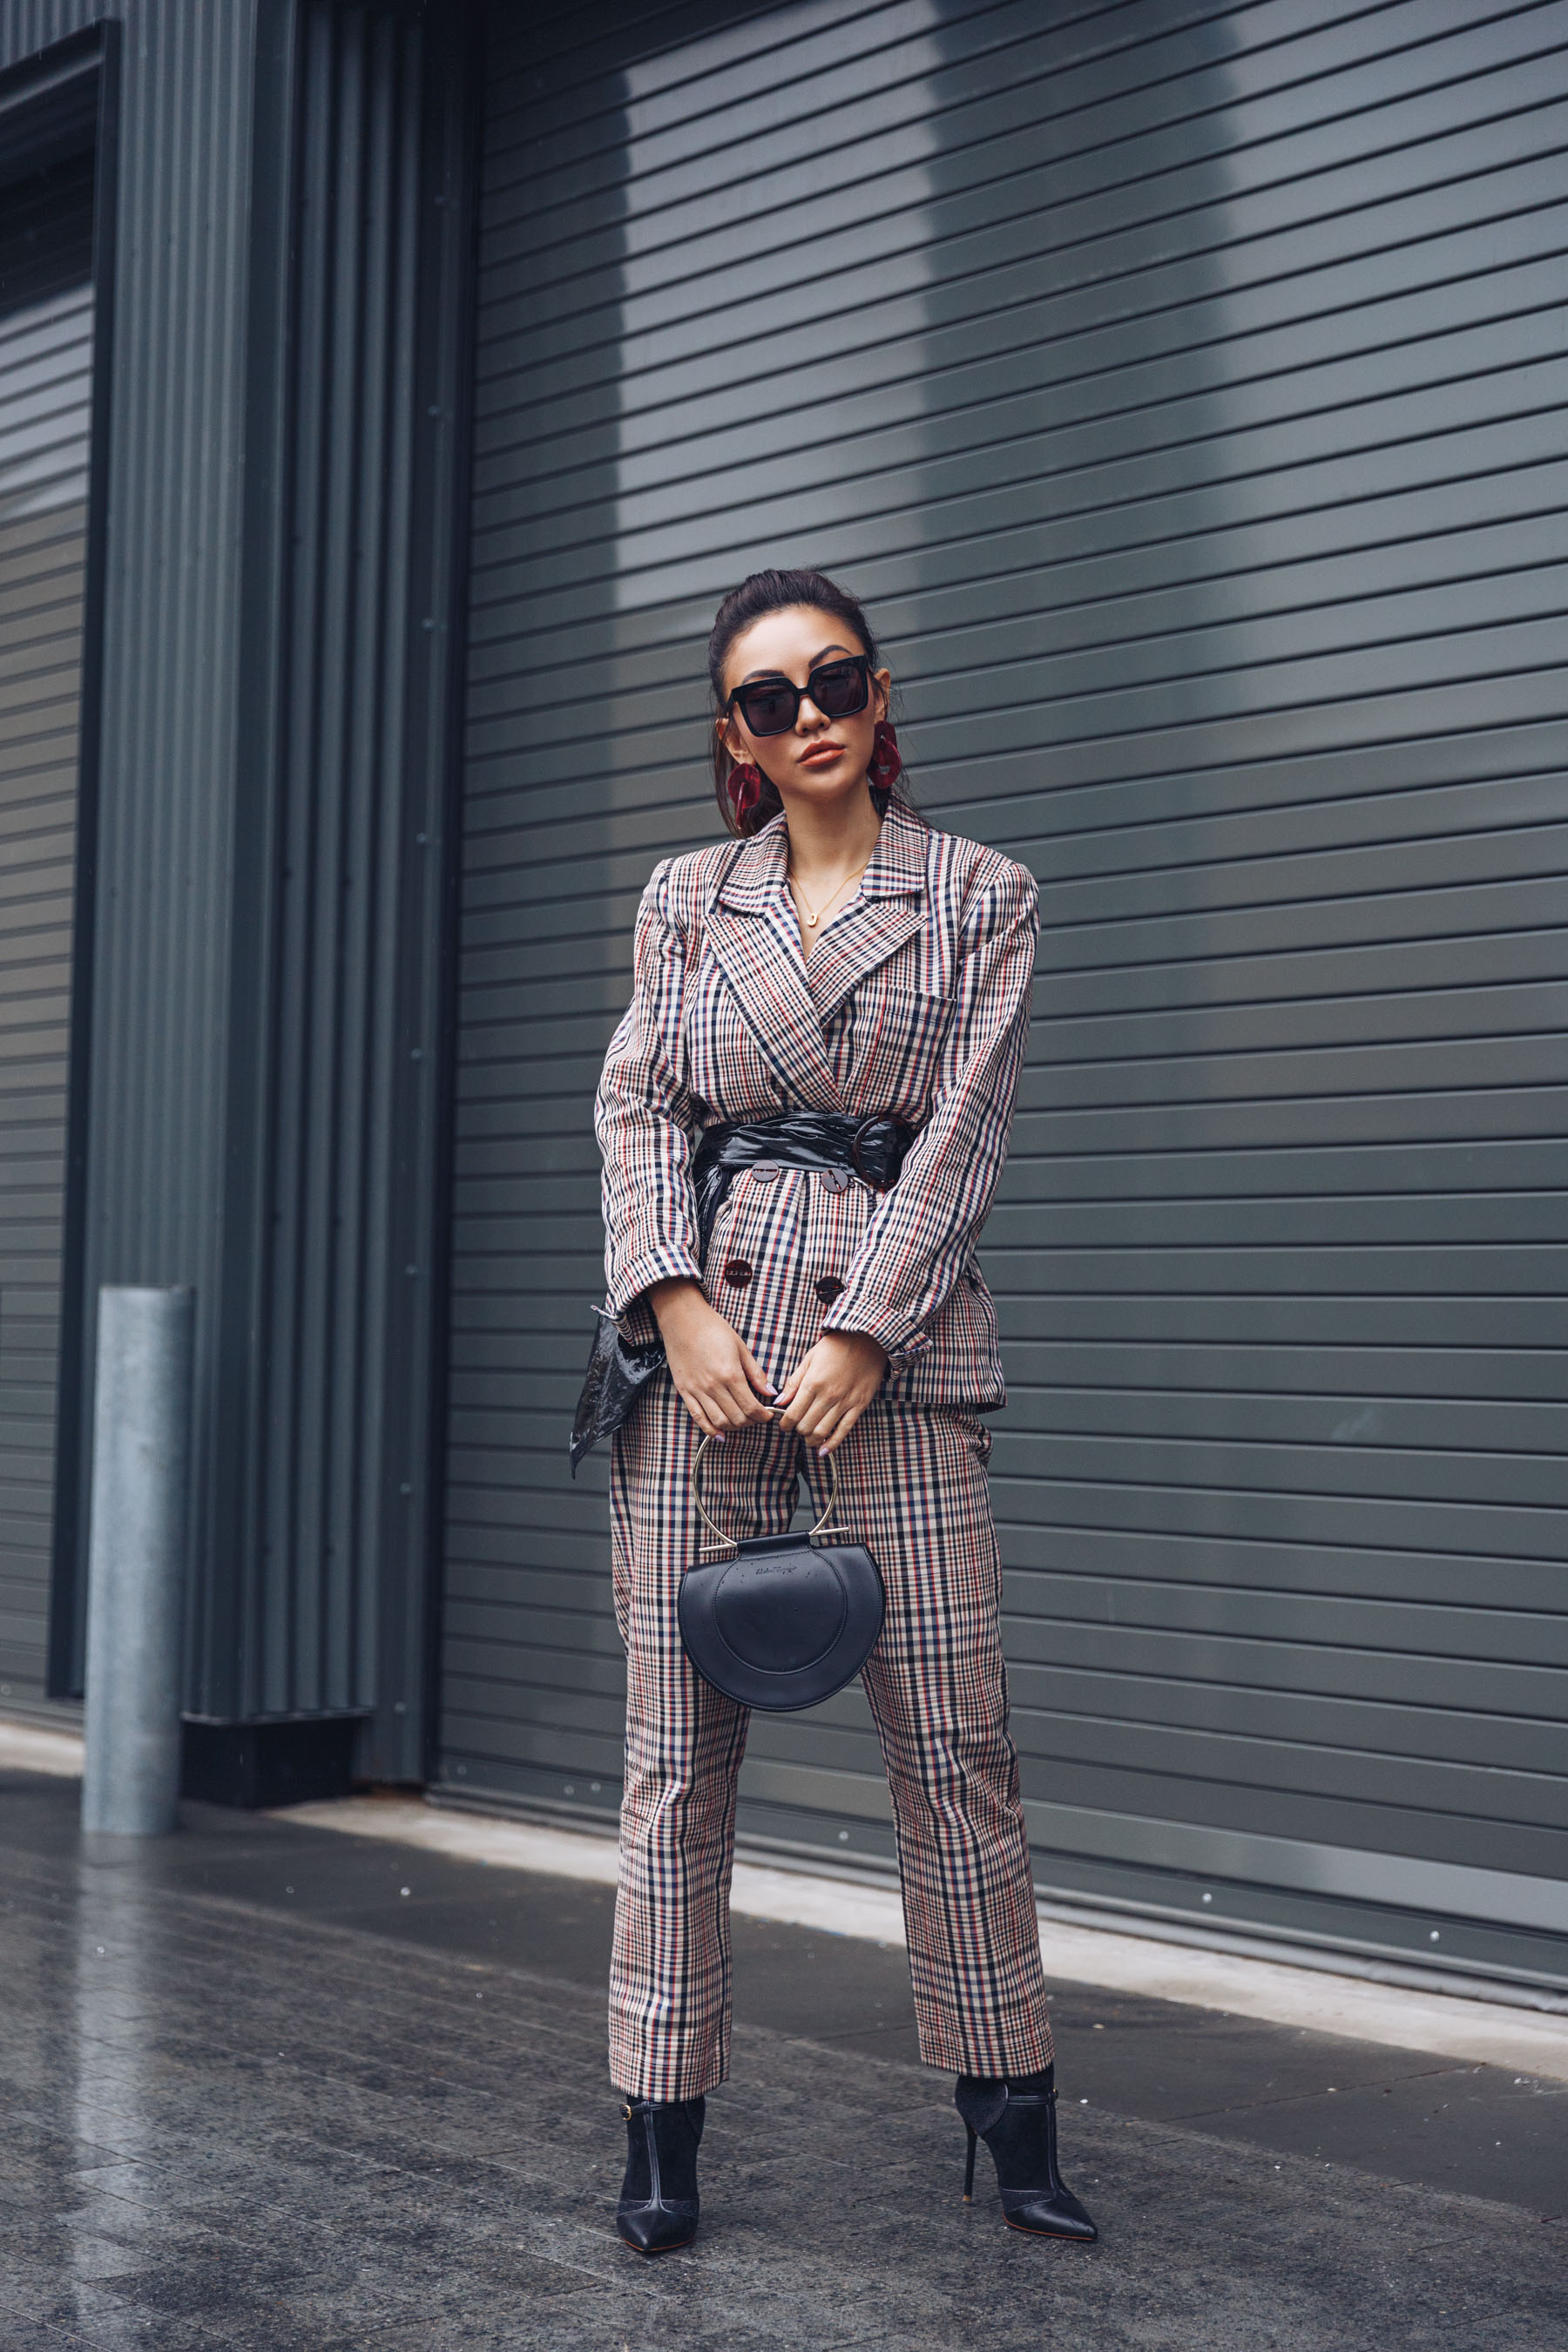 NYFW Day 4 - NotJessFashion going to Tibi Show // Notjessfashion.com // Plaid Suit with Leather Belt